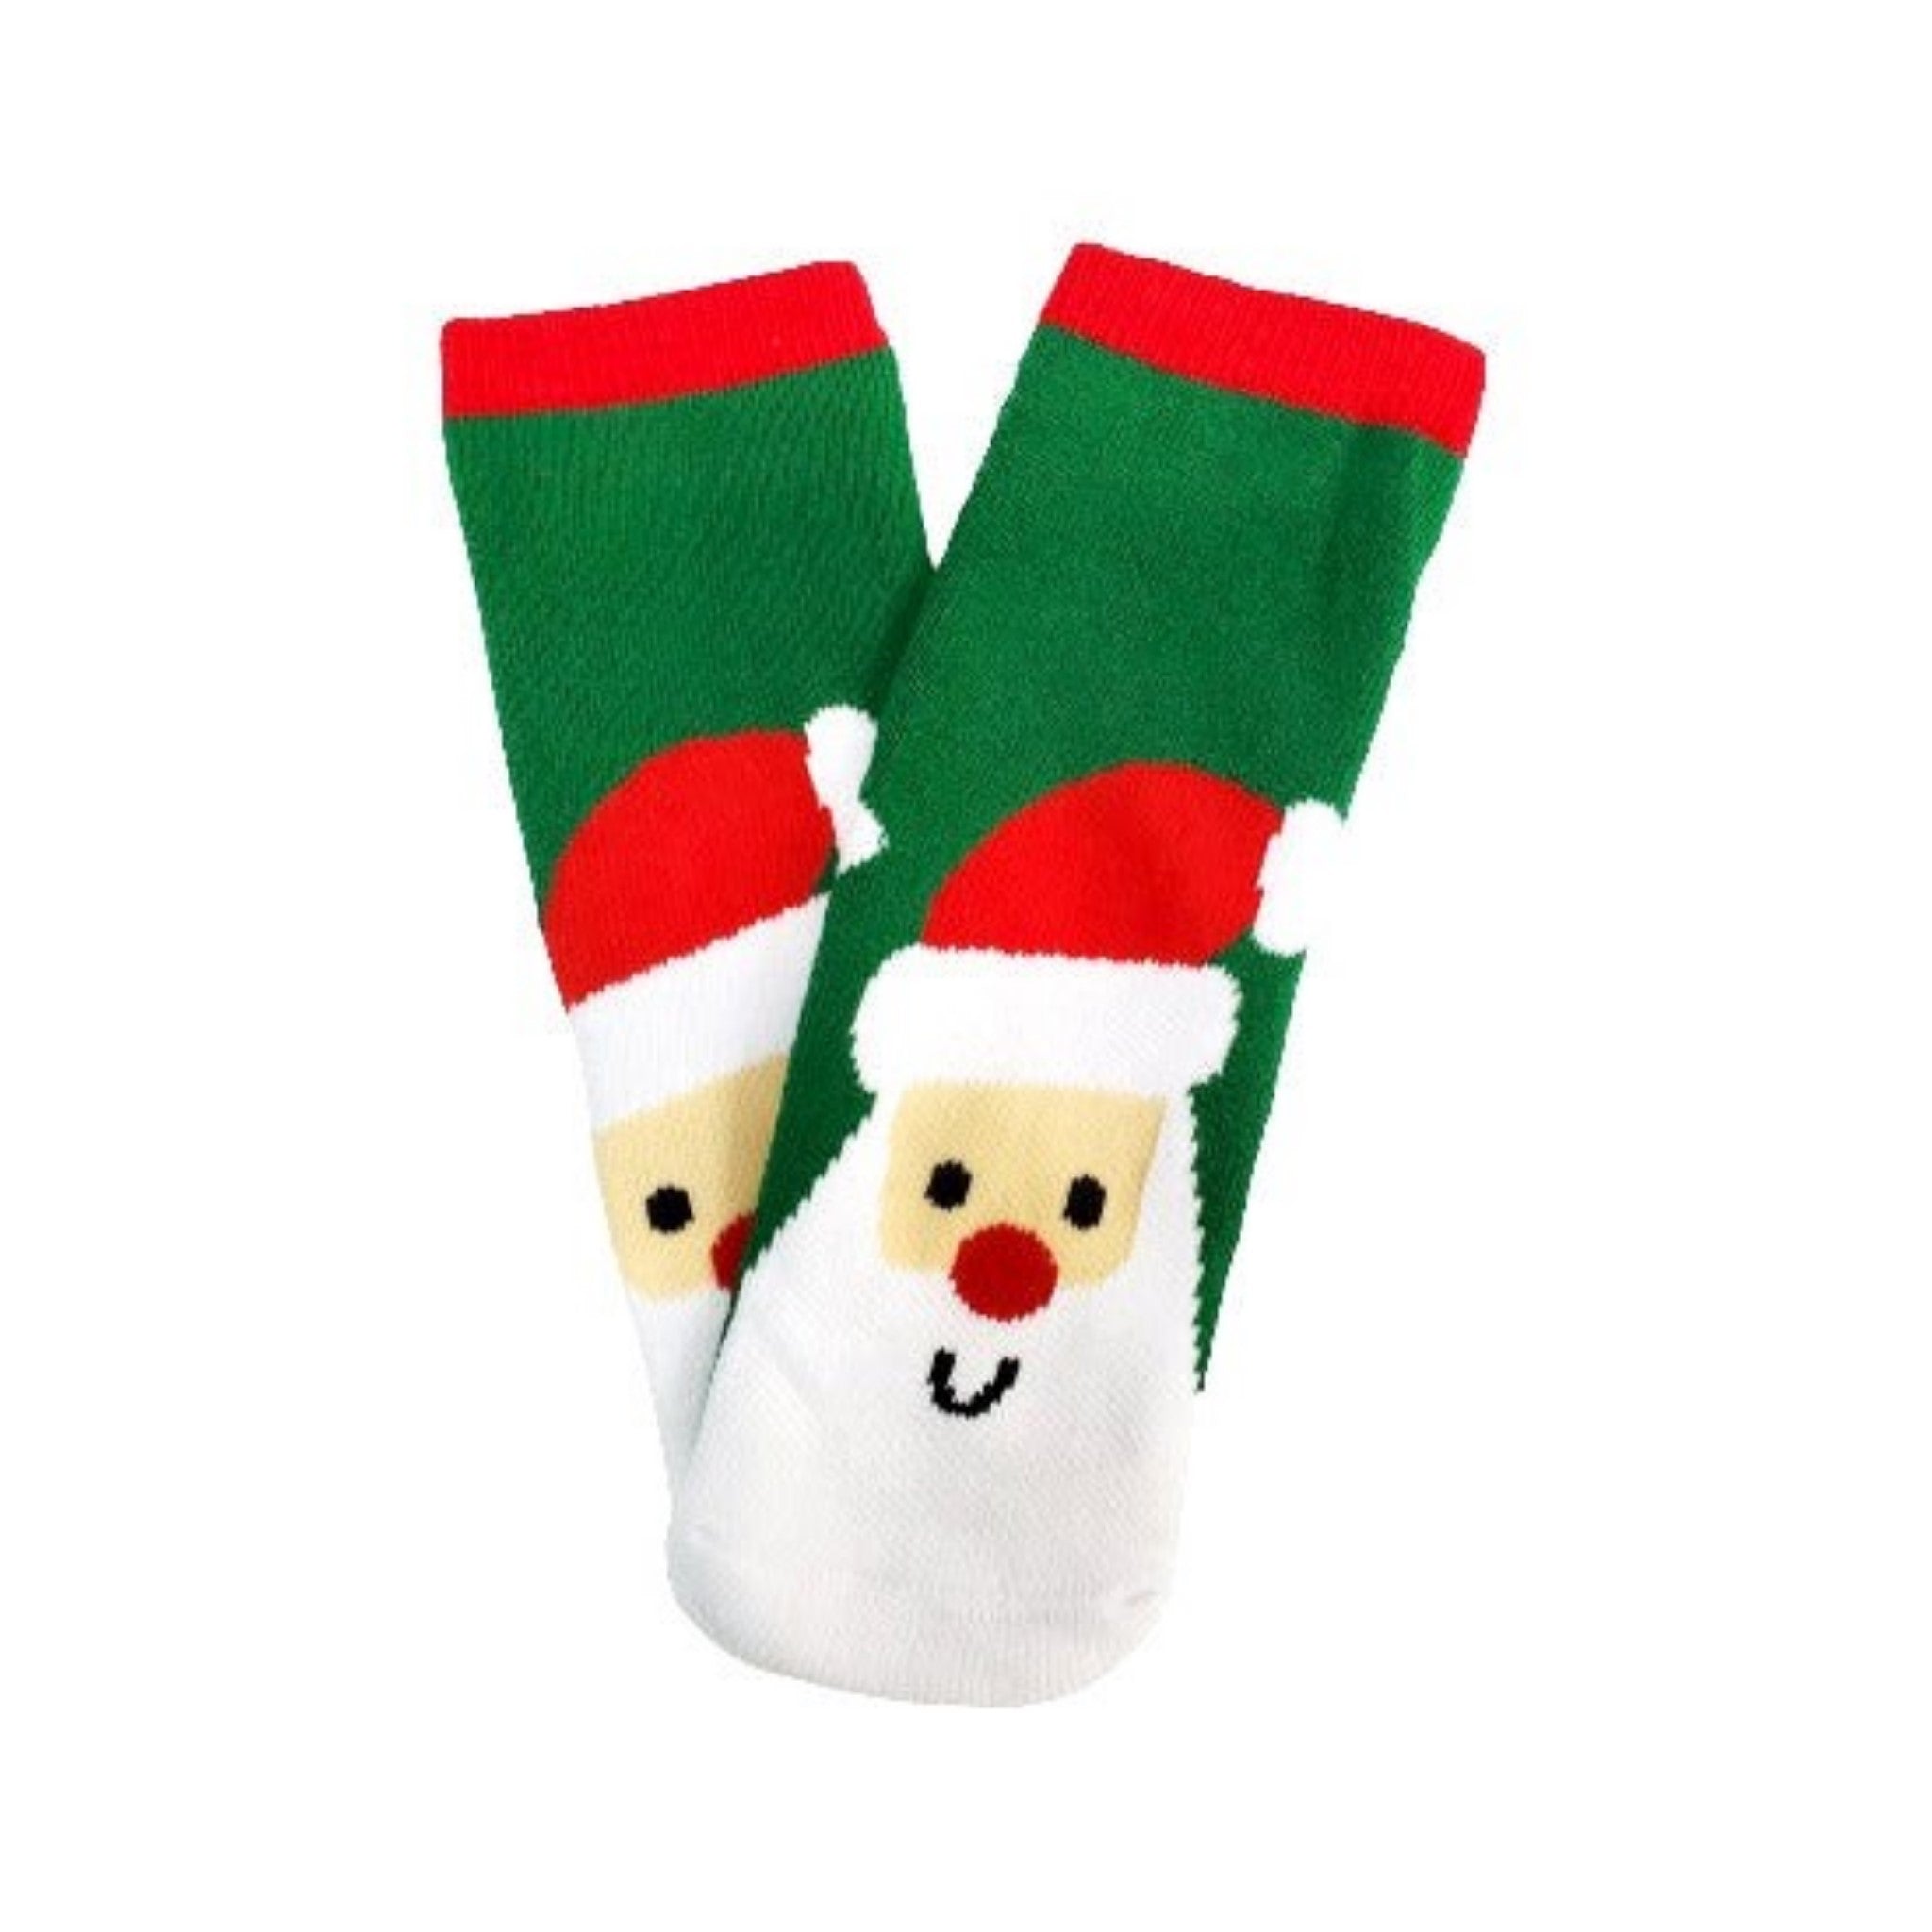 Happy Santa Claus Socks for Kids (Ages 6 mo. to 5 yr)